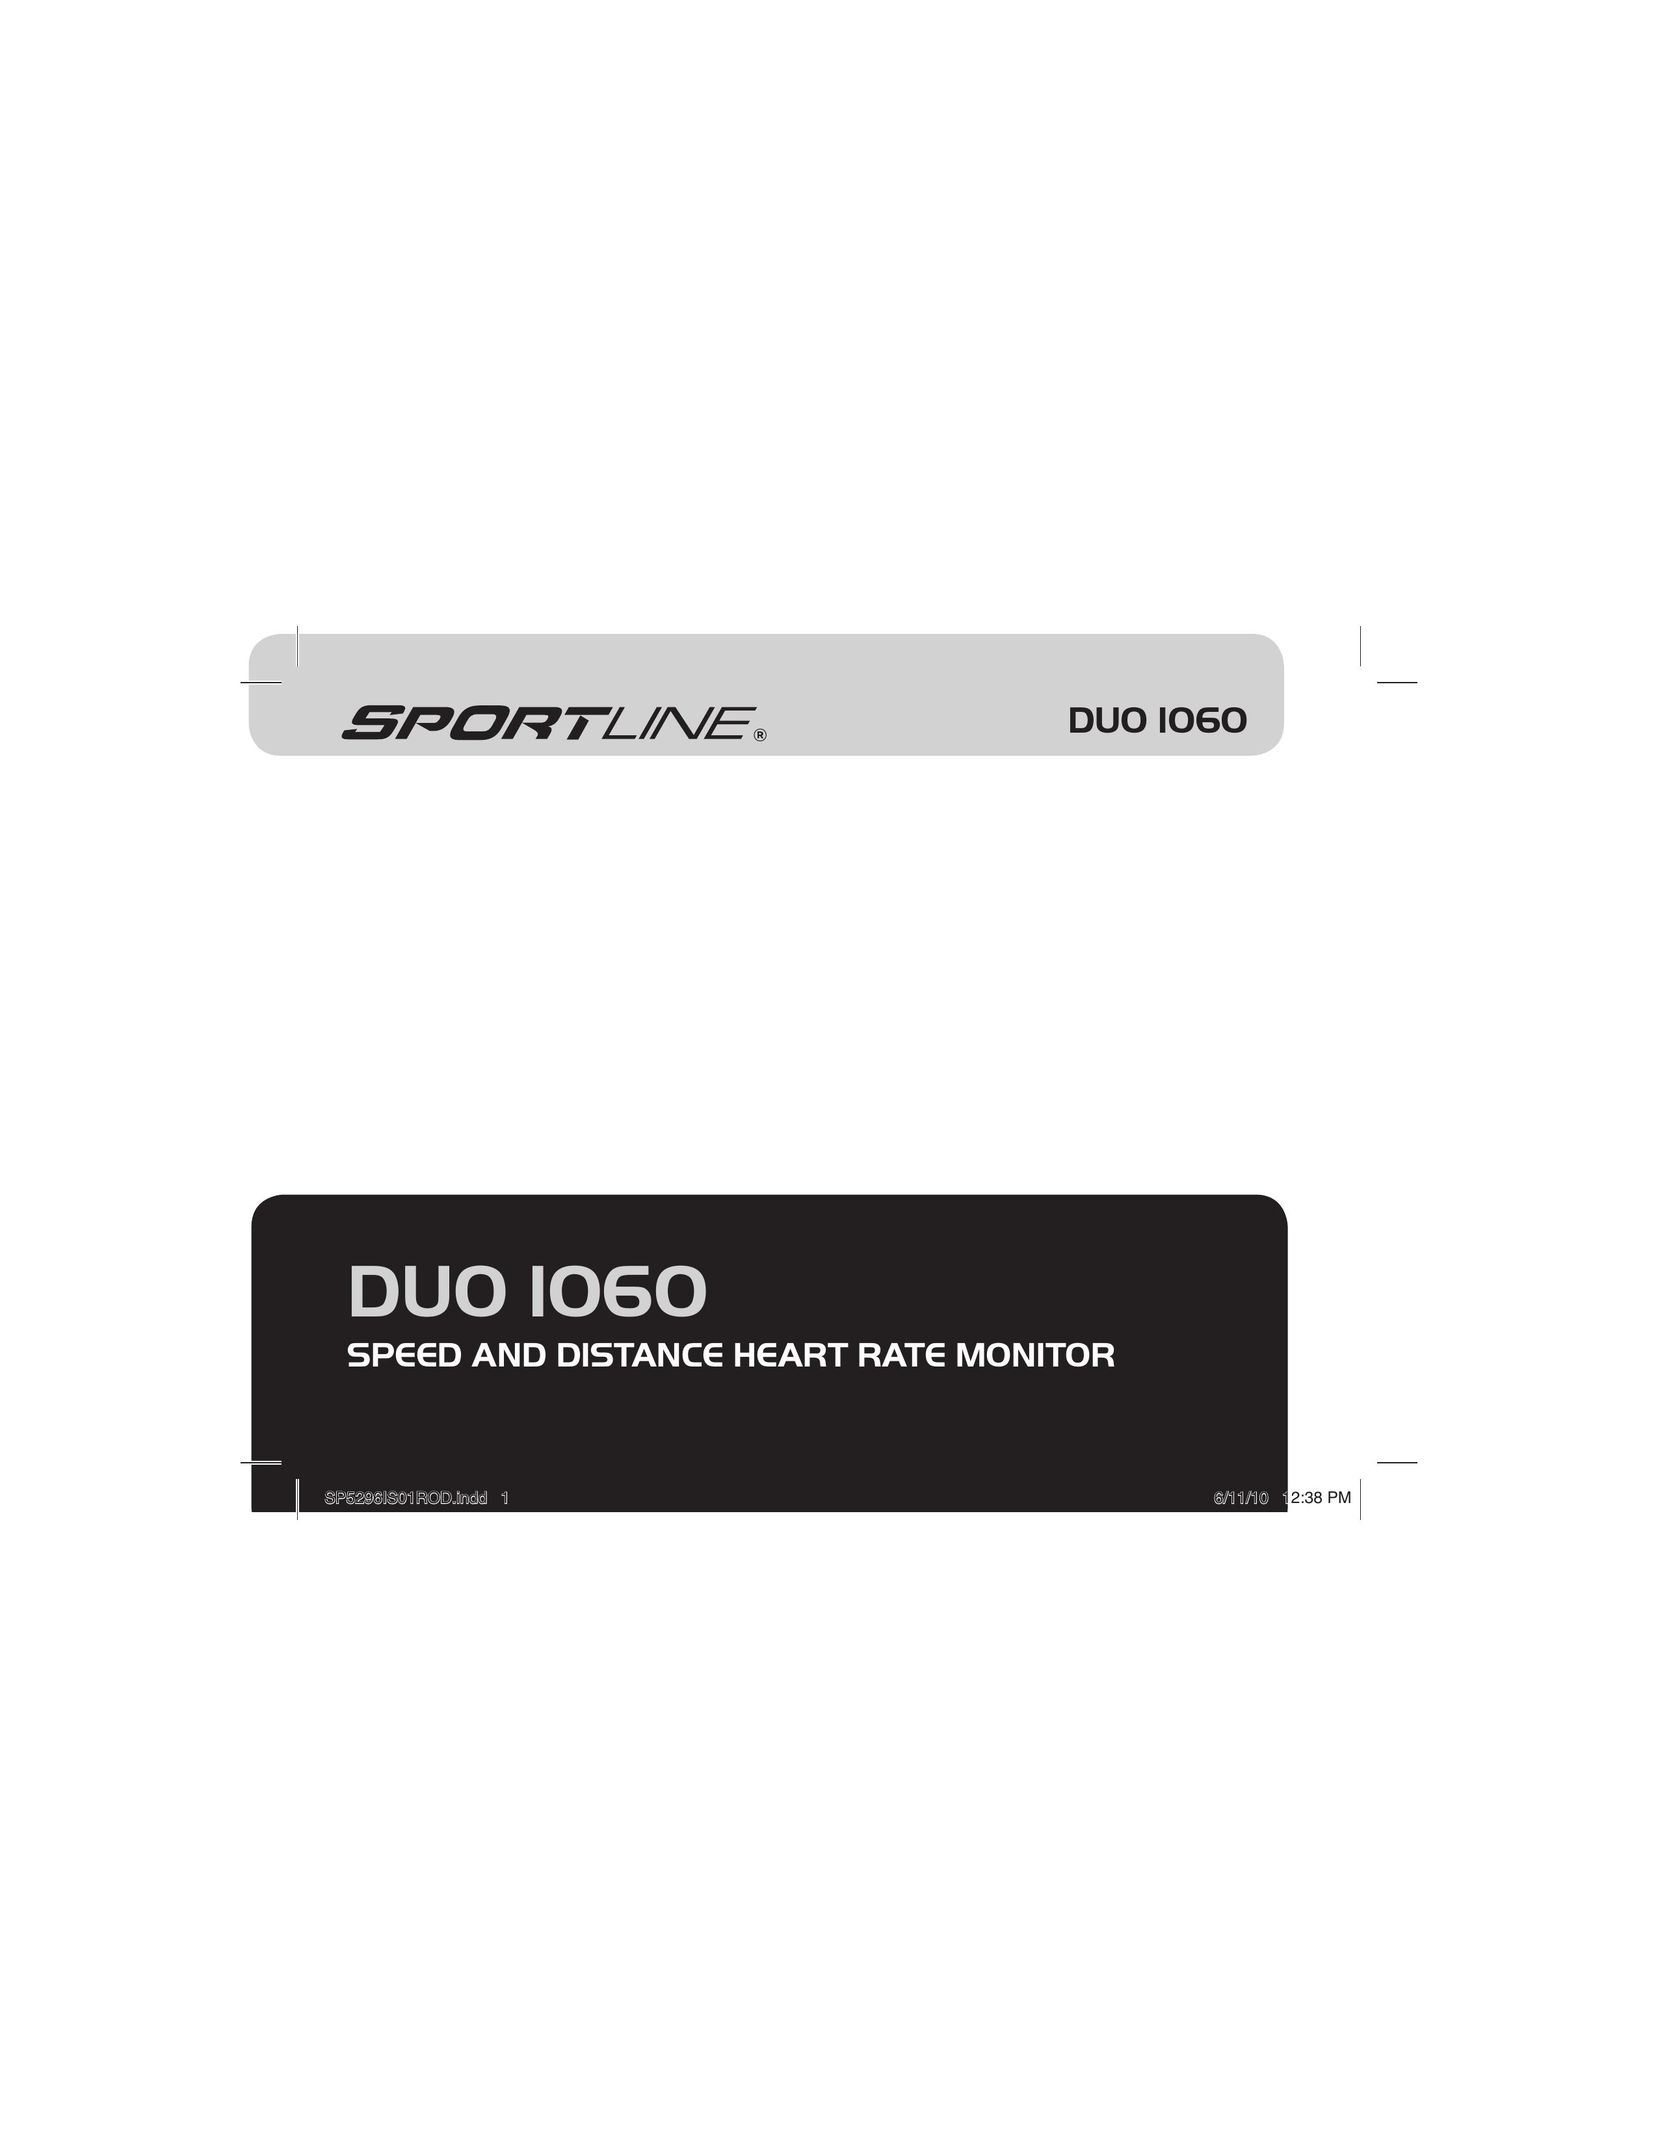 Sportline DUO I060 Heart Rate Monitor User Manual